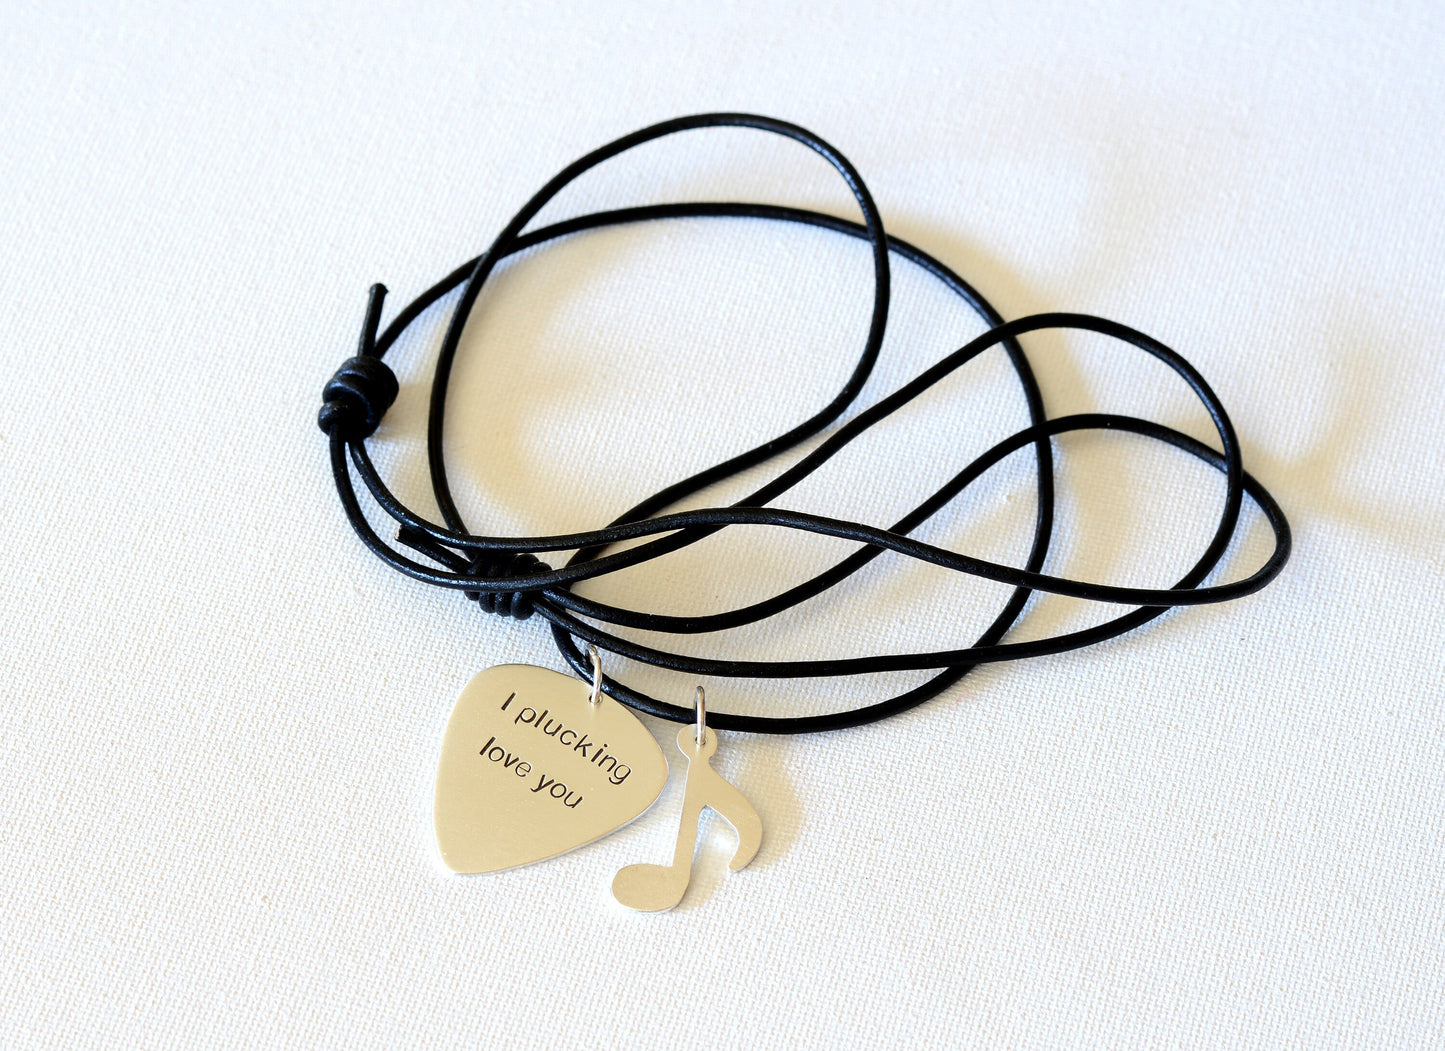 I plucking love you sterling silver guitar pick necklace